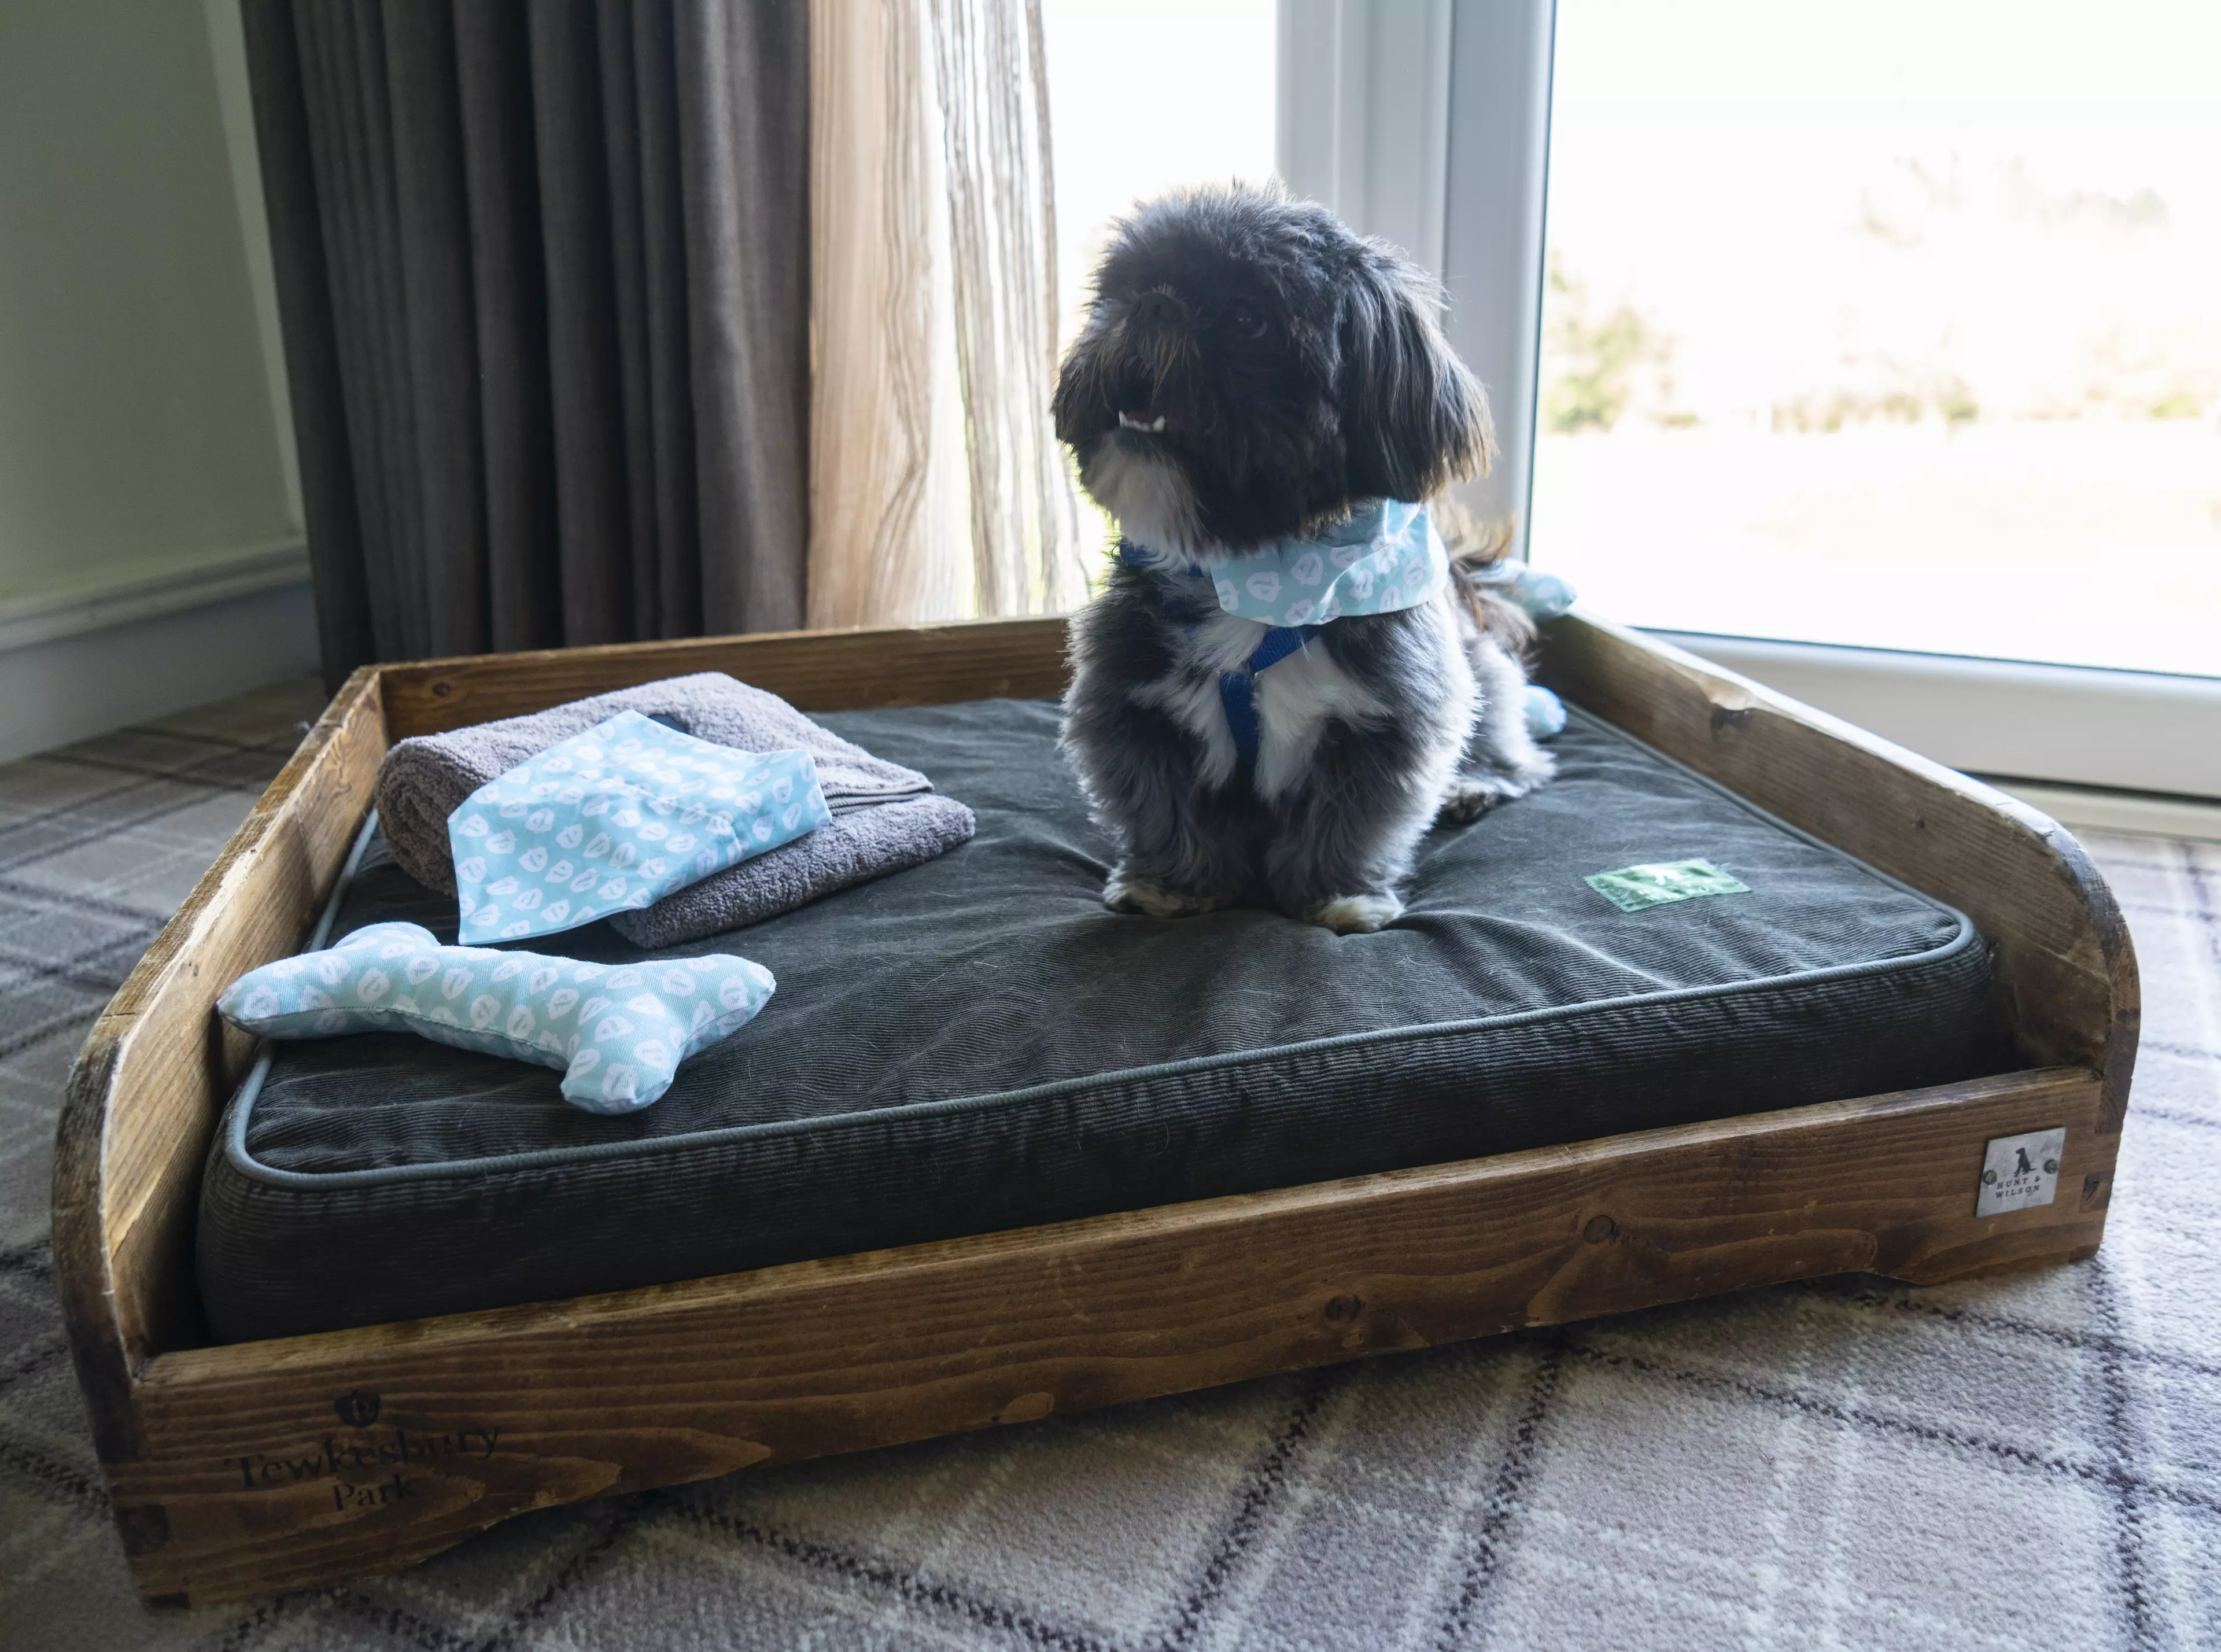 The dogs were treated to memory foam beds and rooms that had direct access to a patio (